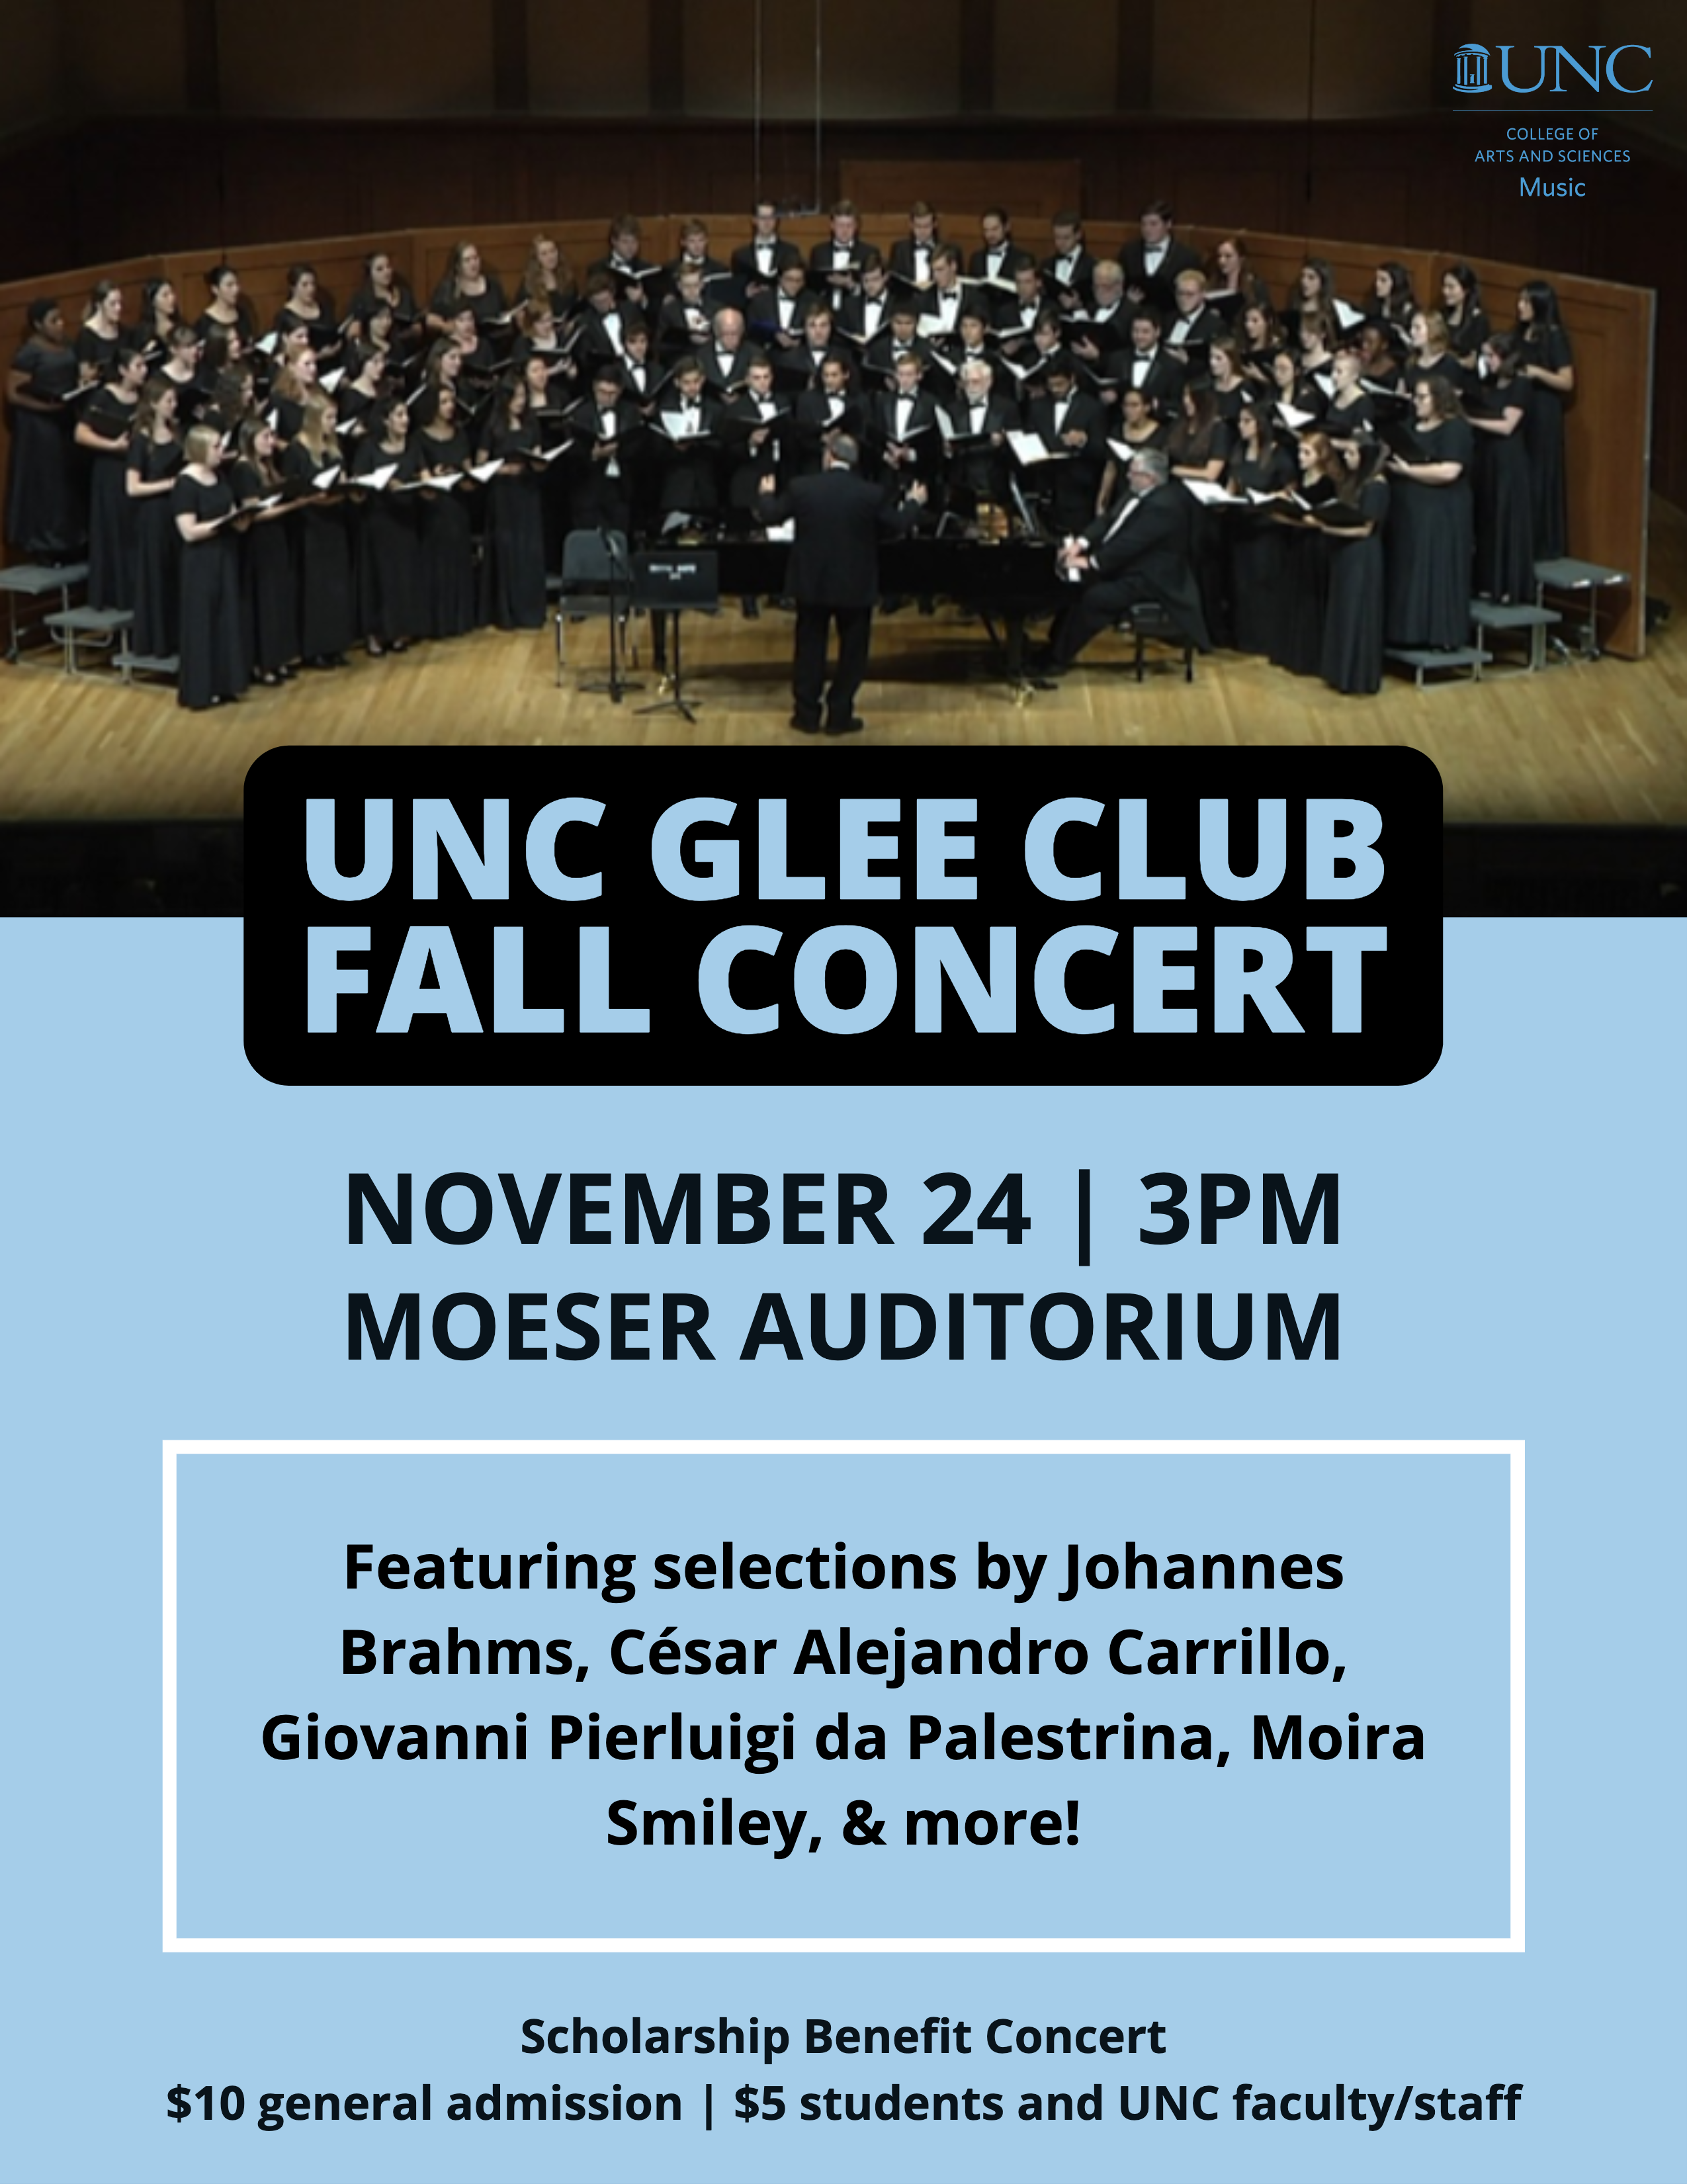 Poster Image, title is: "UNC Glee Club Fall Concert"